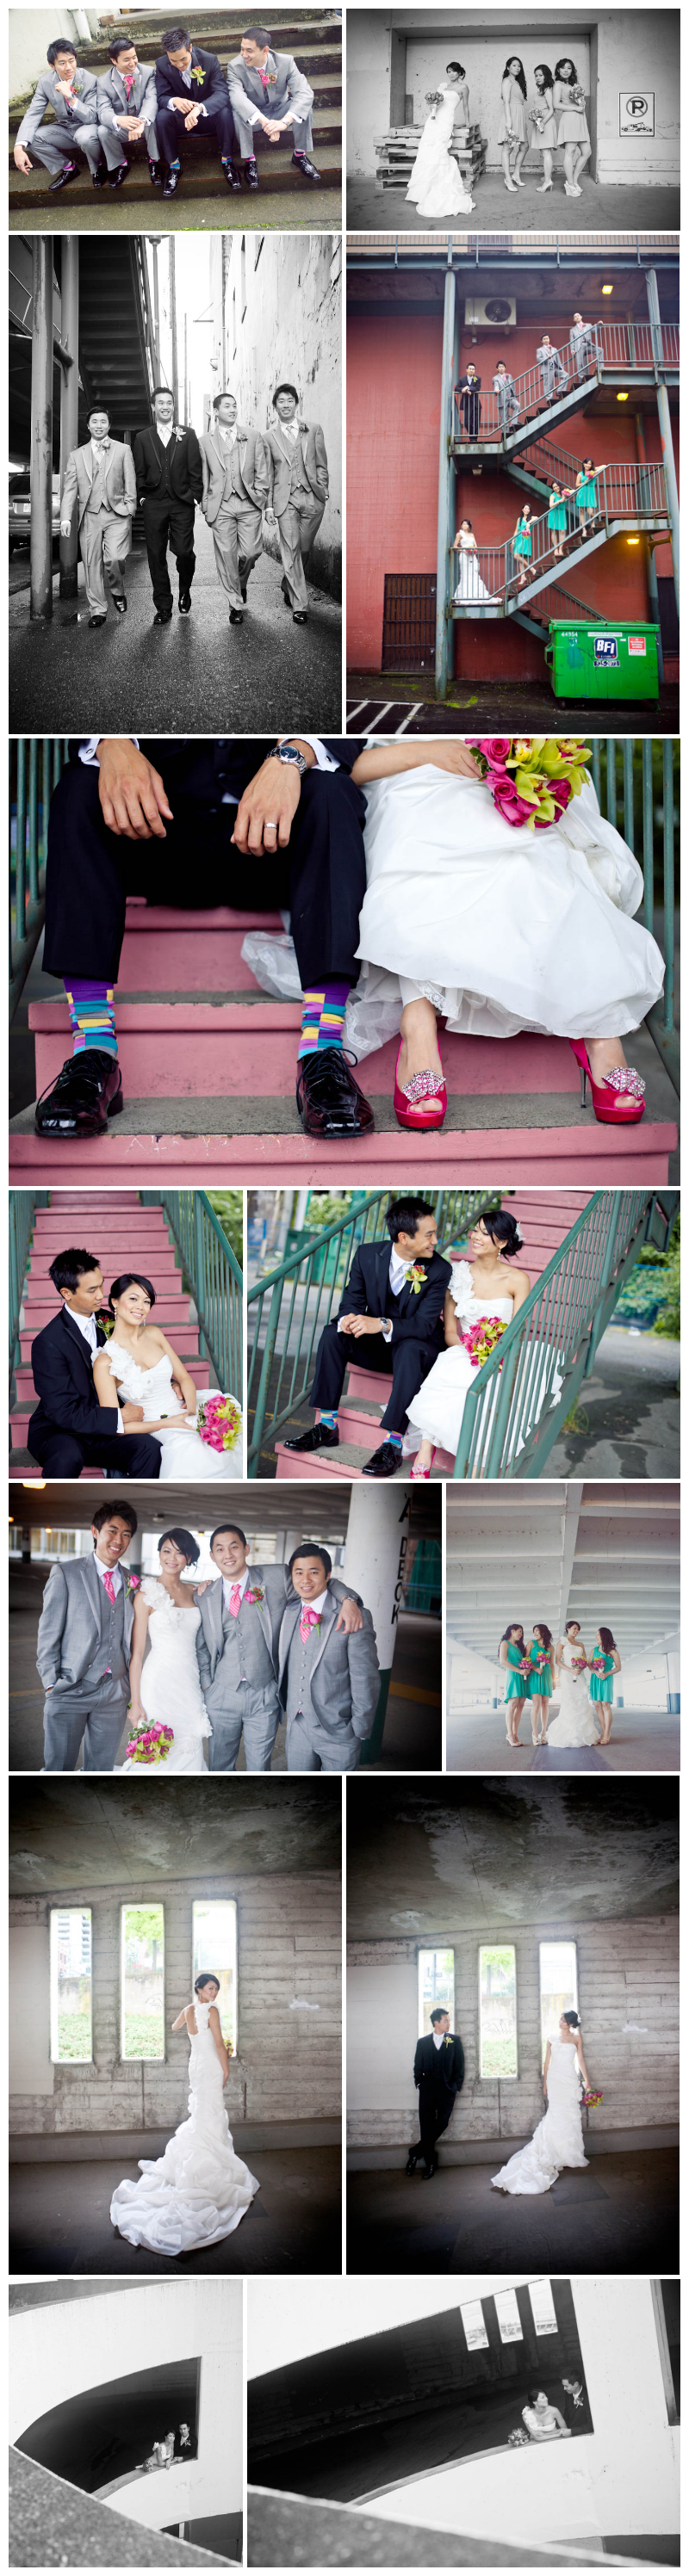 wedding photos, wedding photography, new west, new westminister, parkade, alley, stairs, wedding party, bridesmaids, groomsmen, pink shoes, striped socks, colour, urban, bouquet, hip, jayna marie, hair, makeup 